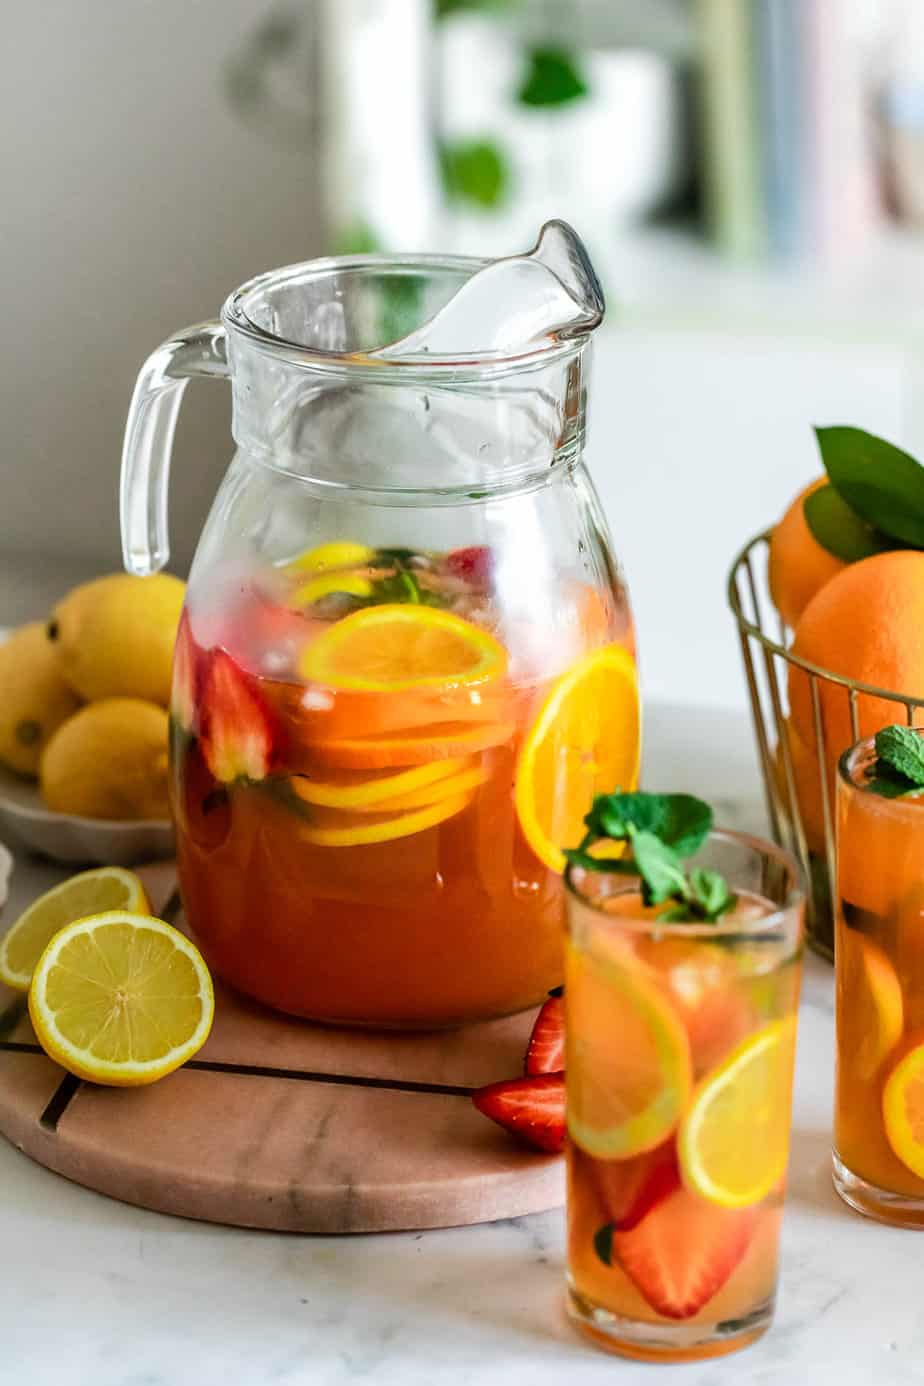 A pitcher with juice and fresh fruit.